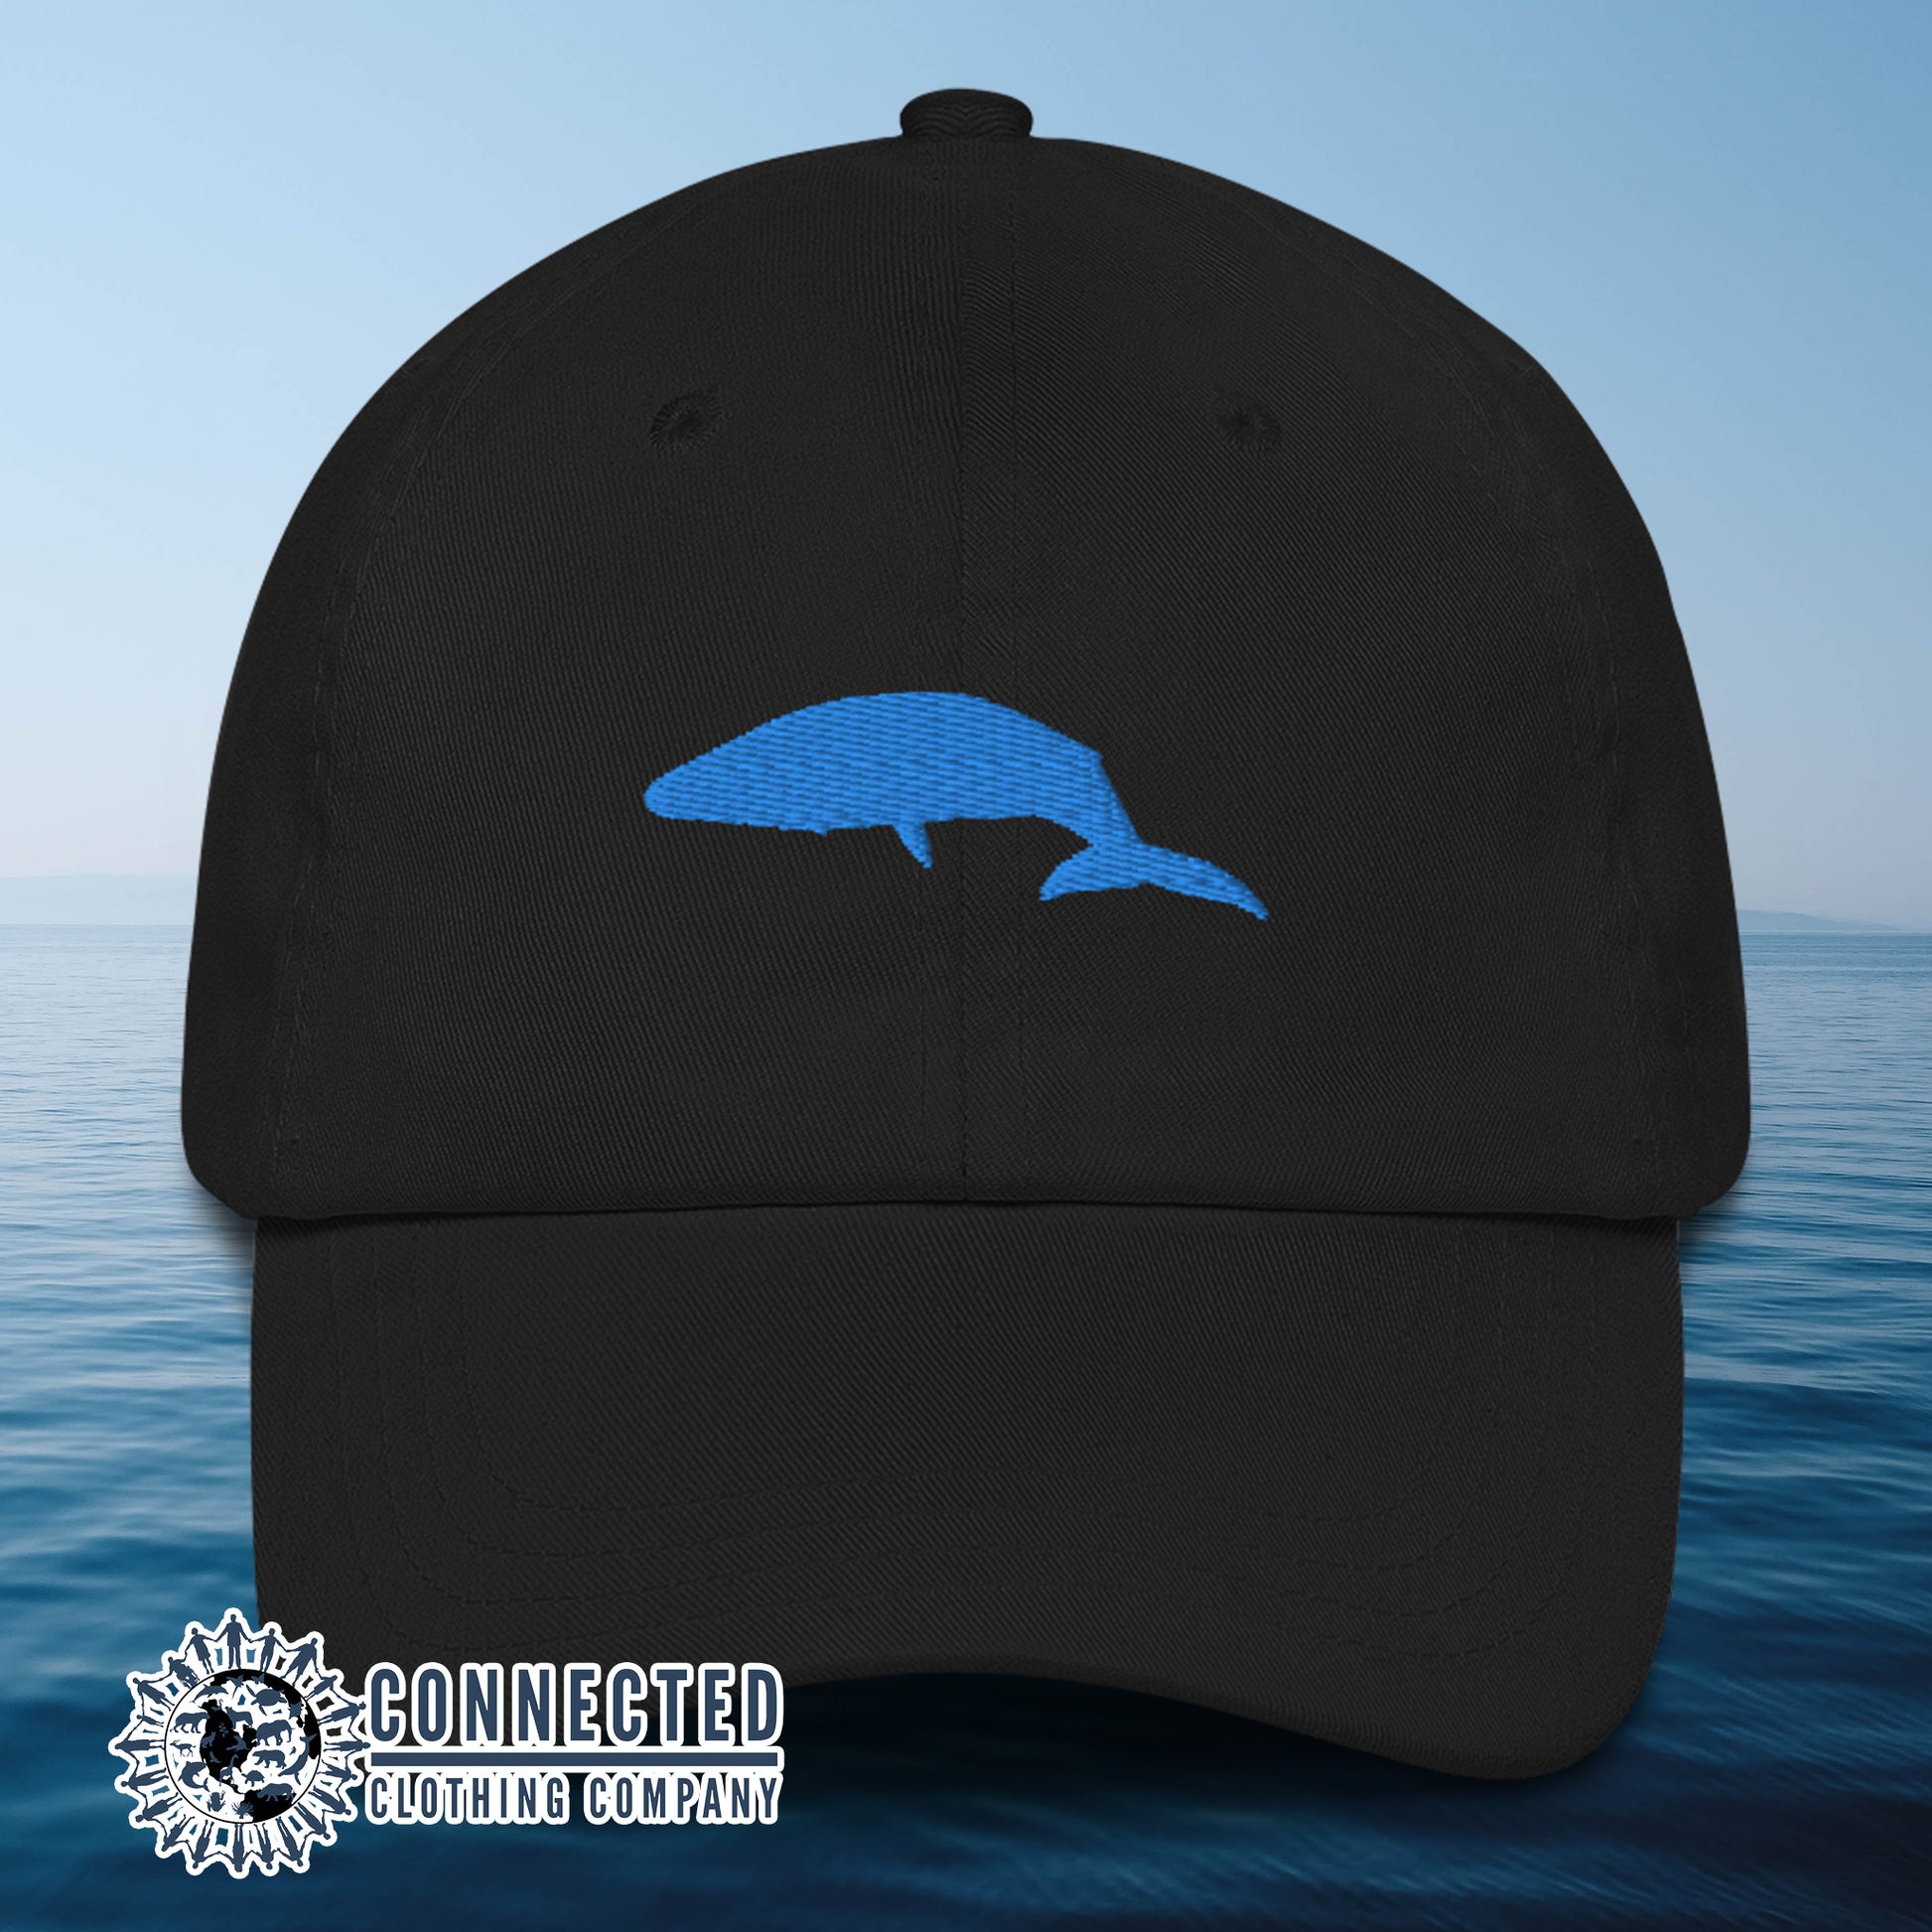 Black Blue Whale Cotton Cap - sweetsherriloudesigns - 10% of profits donated to Mission Blue ocean conservation